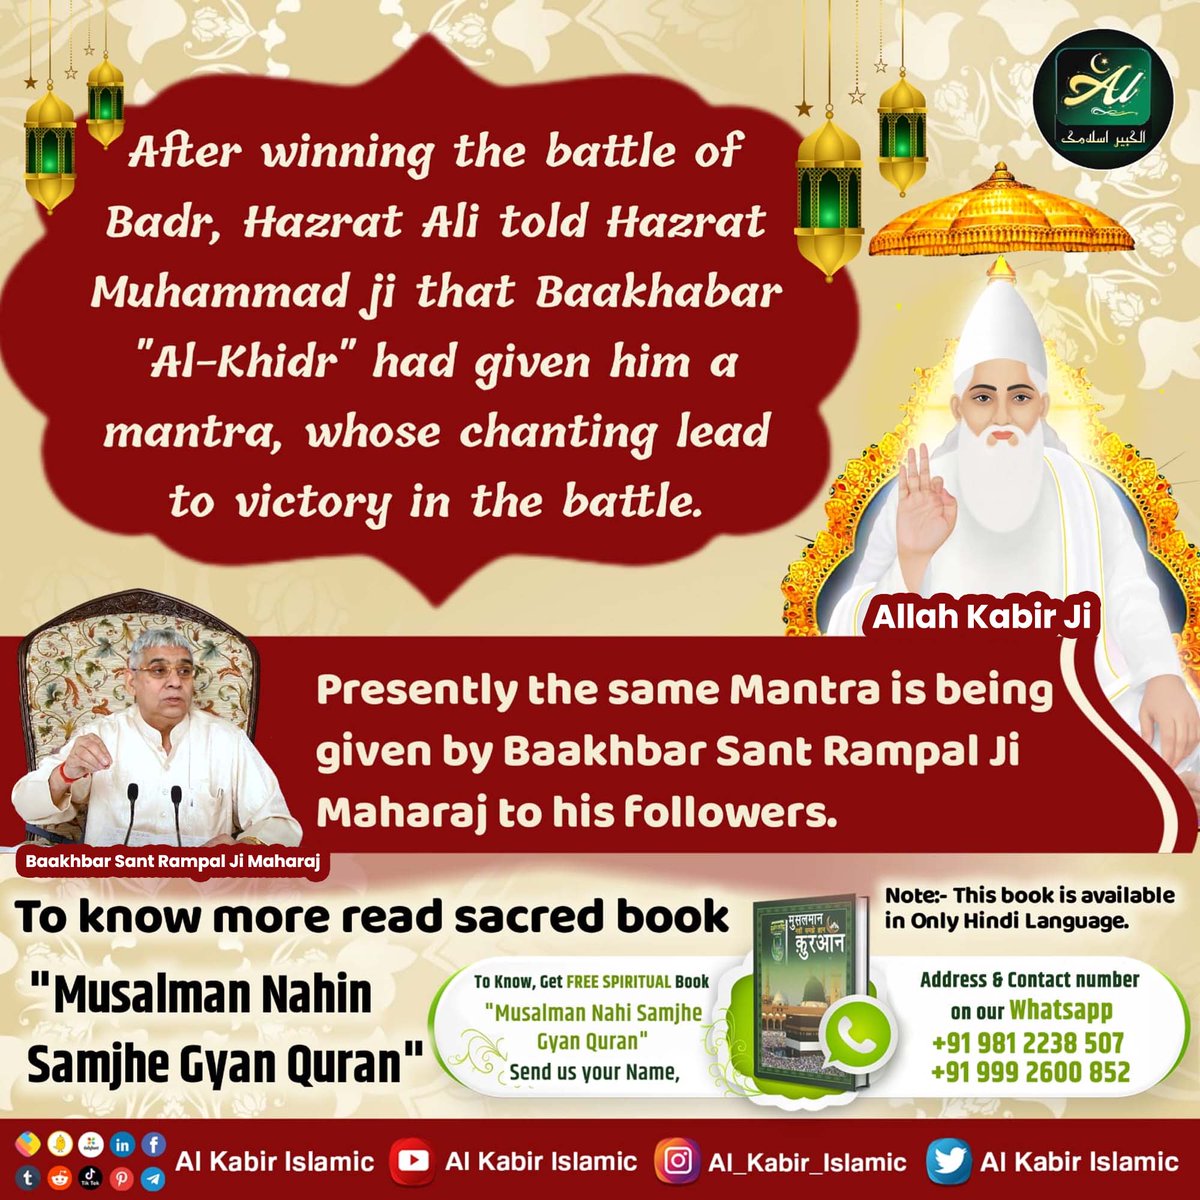 #अल्लाह_का_इल्म_बाखबर_से_पूछो After winning the battle of Badr, Hazrat Ali told Hazrat Muhammad ji that Baakhabar Al-Khidr had given him a mantra, whose chanting lead to victory in the battle. Presently the same mantra is being given by Baakhabar Sant Rampal Ji to his followers🙏